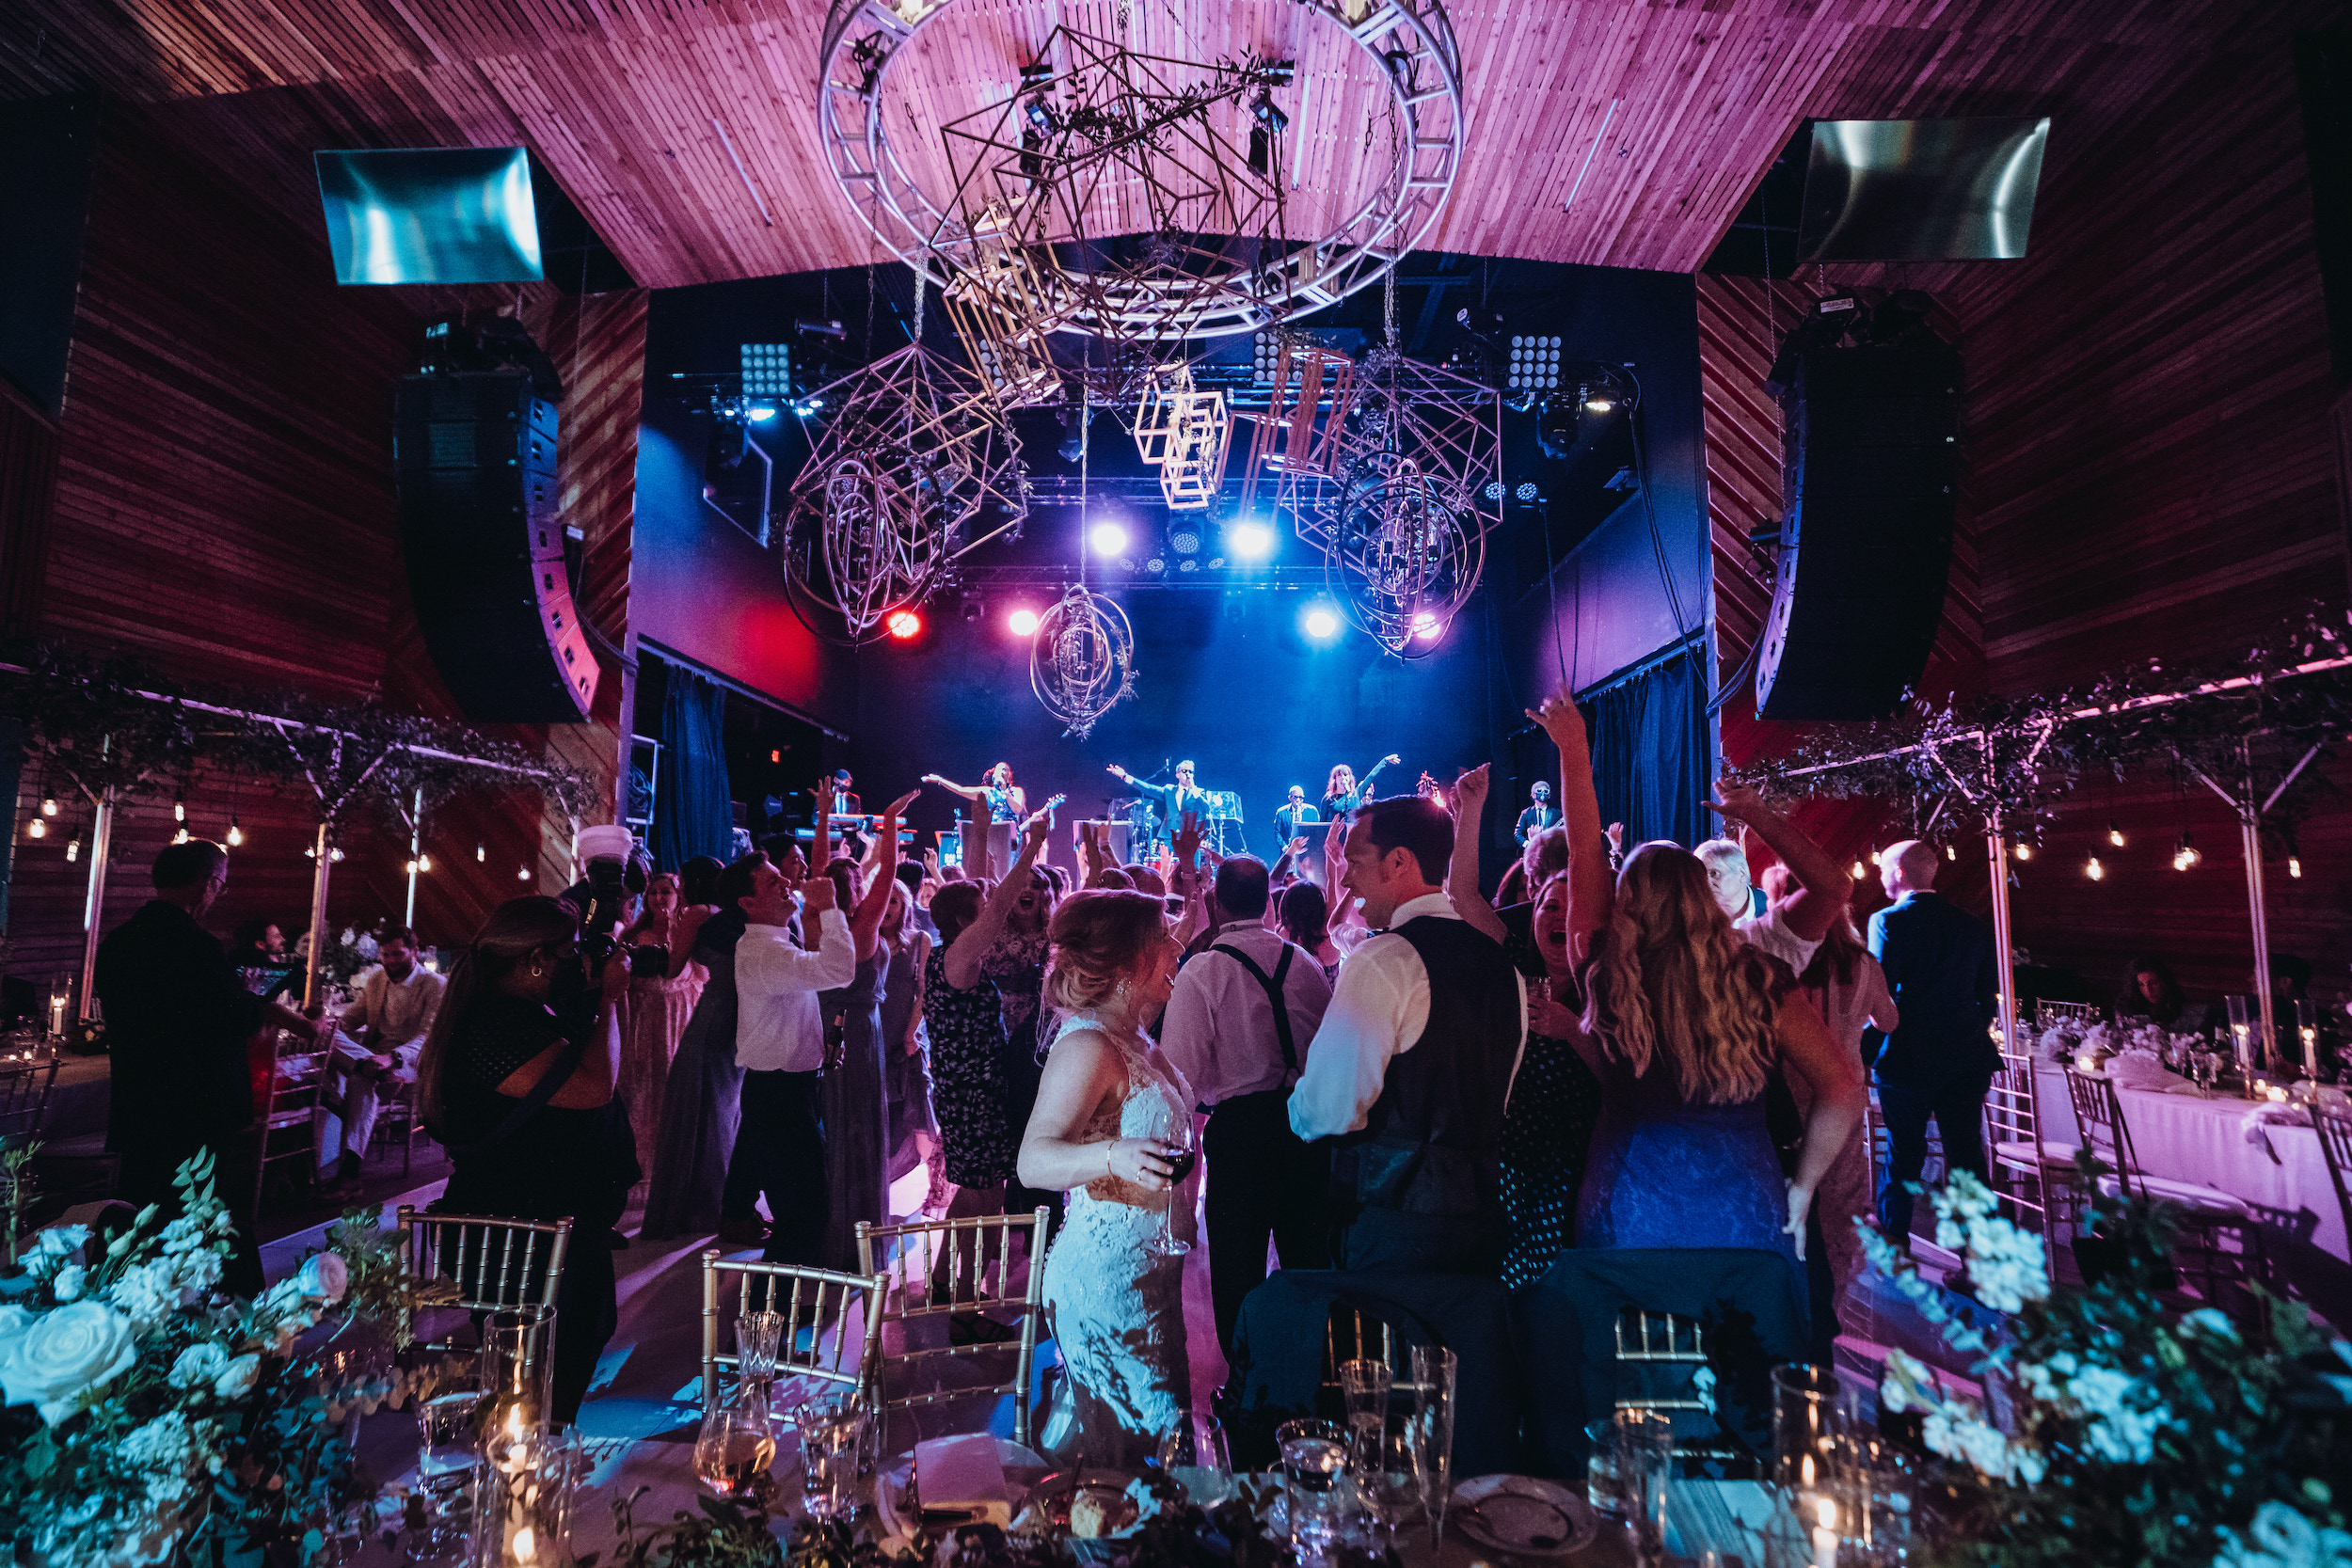 A lively wedding reception with blue, purple and red stage lights and wedding guests dancing to a live band performing on stage at a music hall in Houston, TX.